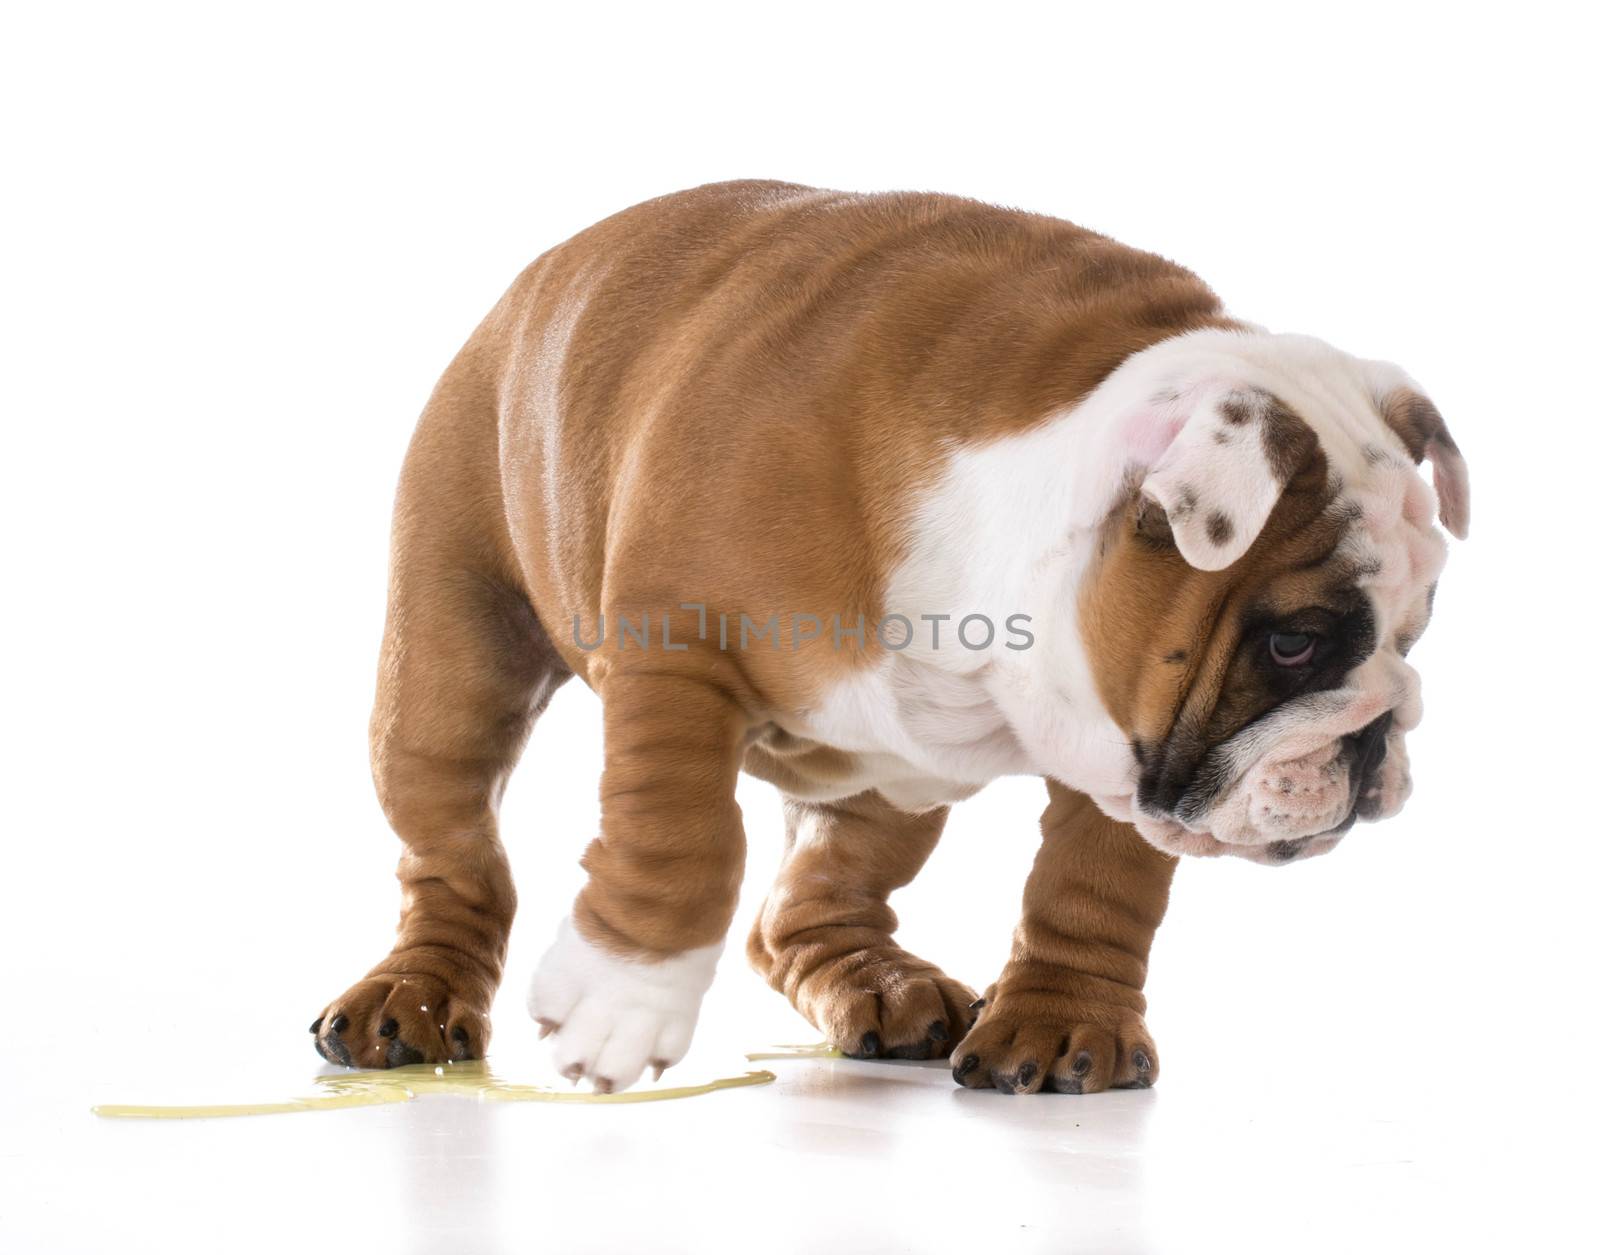 puppy peeing - bulldog puppy peeing isolated on white background